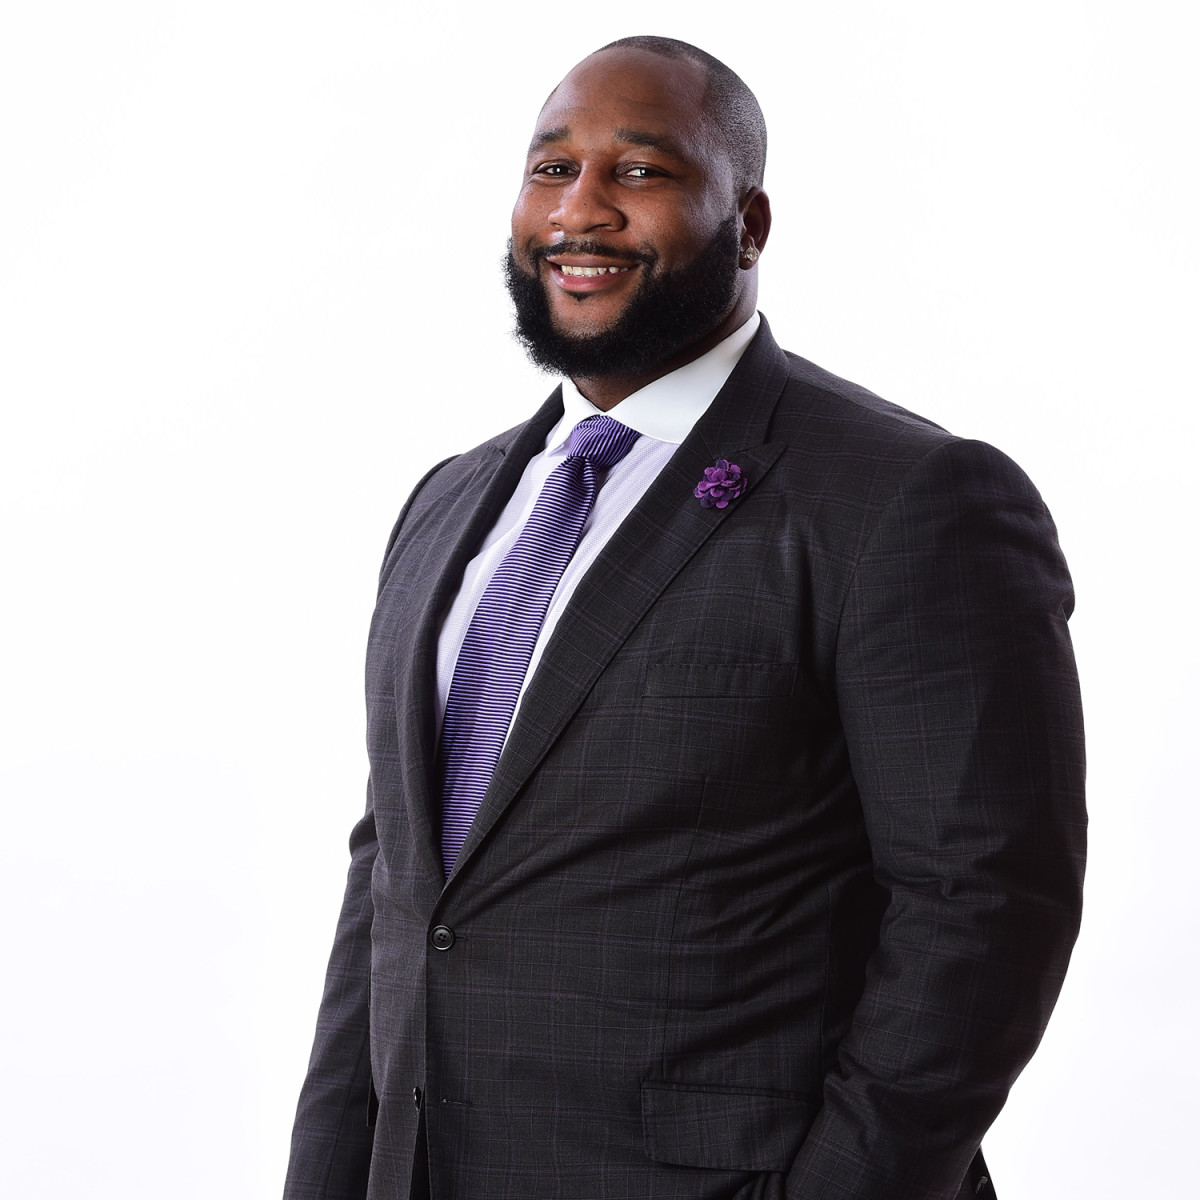 Marcus Spears has become a multi-show and multi-network personality for ESPN.